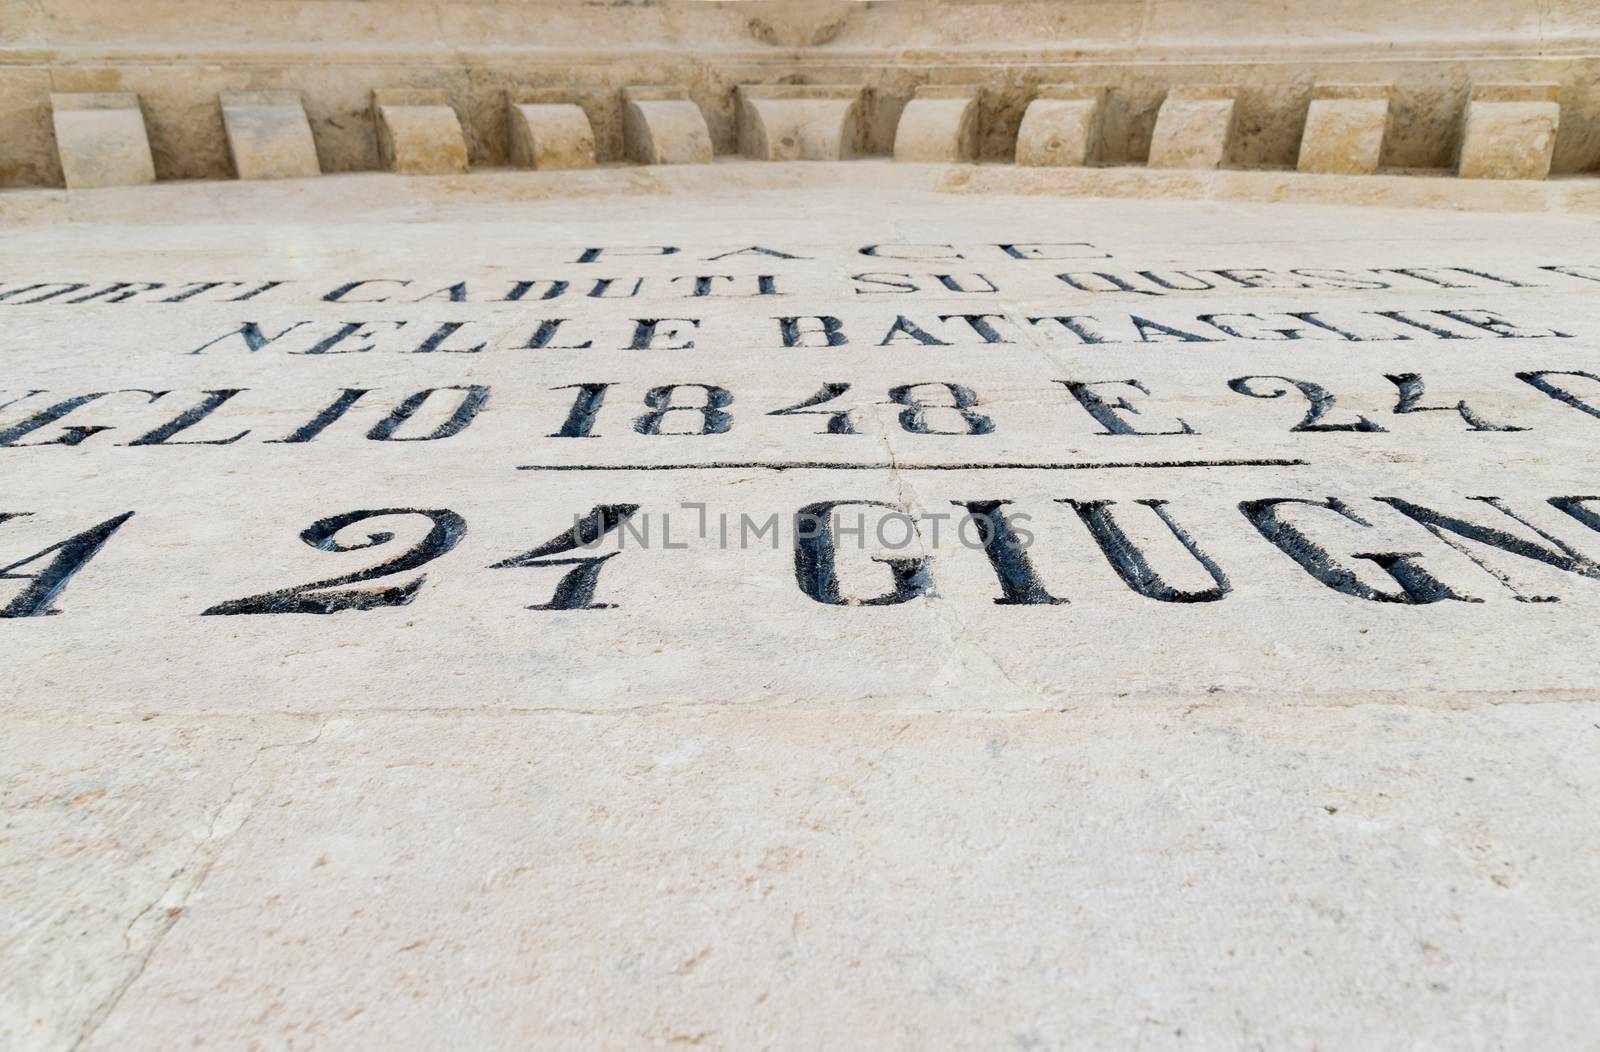 phrases engraved on commemorative monument